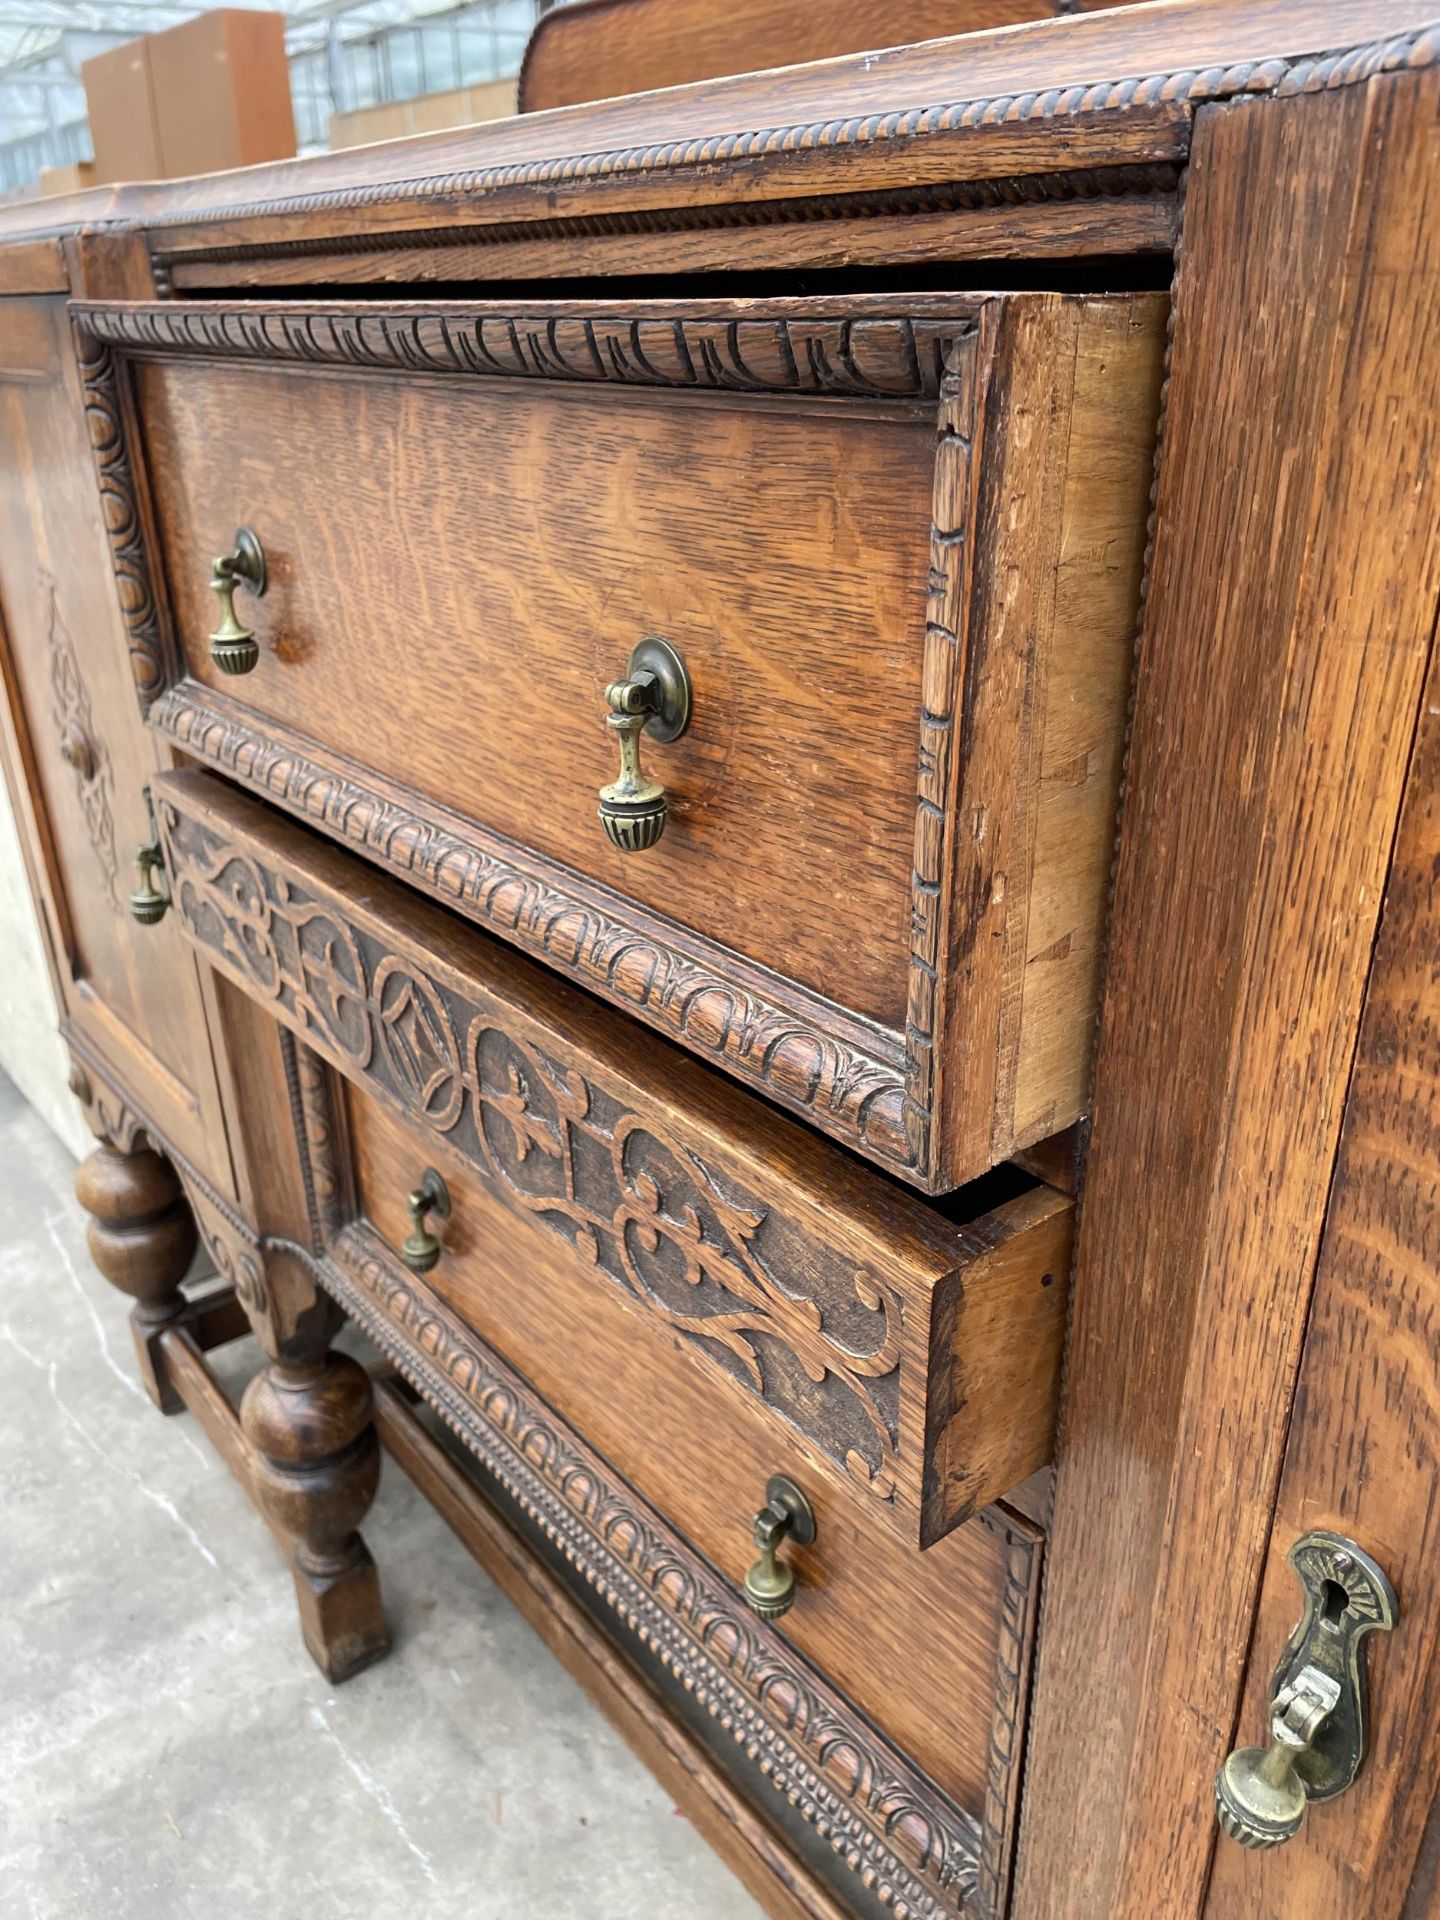 AN EARLY 20TH CENTURY OAK JACOBEAN STYLE BREAK FRONT SIDEBOARD WITH RAISED RACK, 60" WIDE - Image 3 of 6